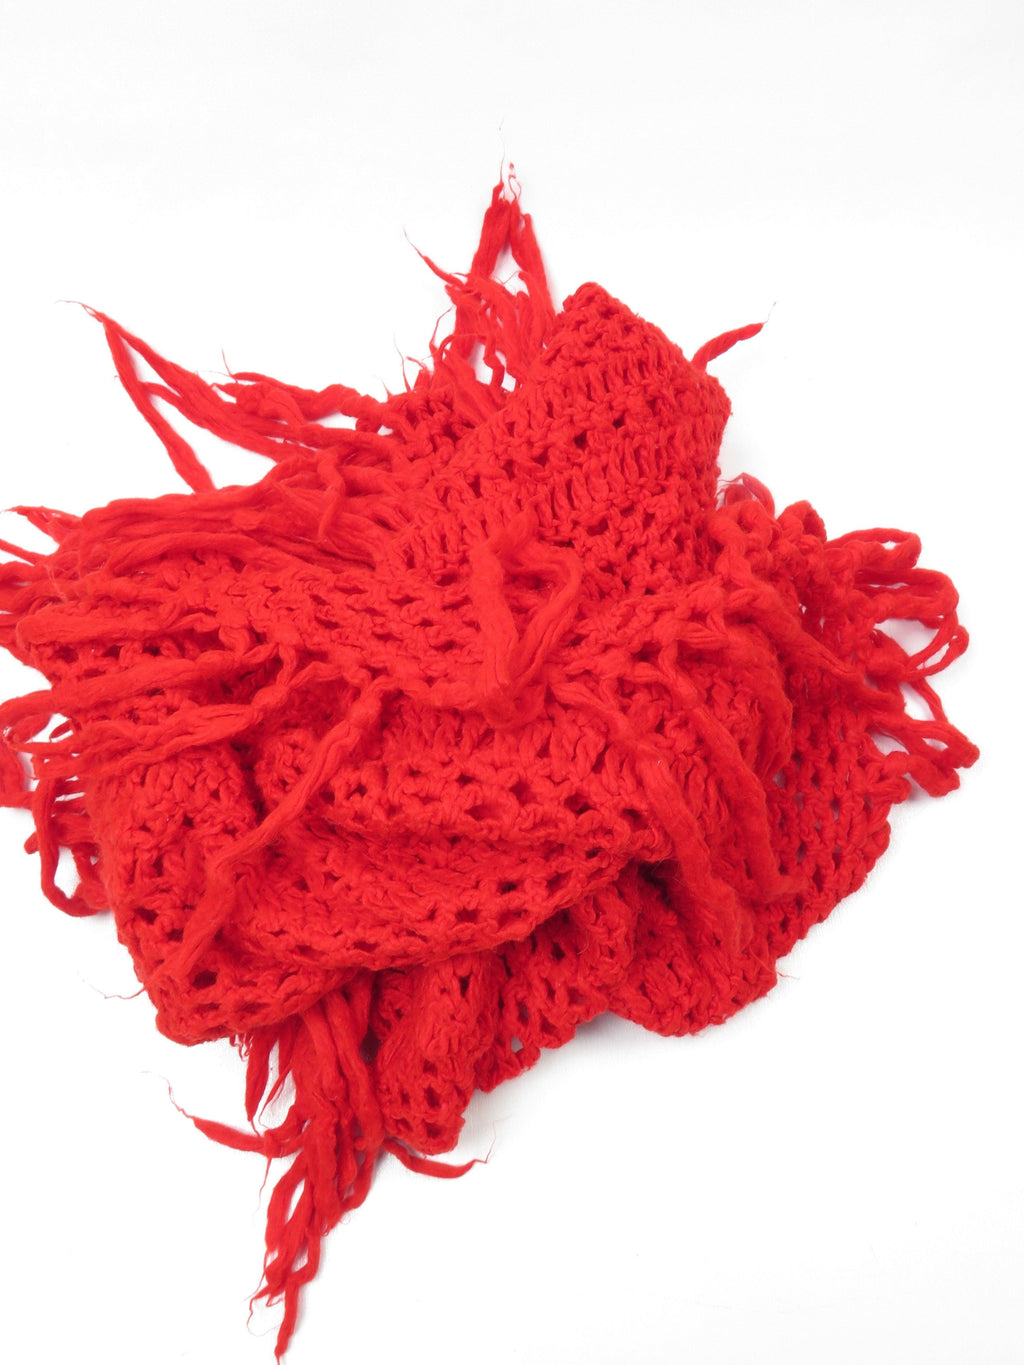 Red Vintage Crochet Large Scarf/Shawl - The Harlequin